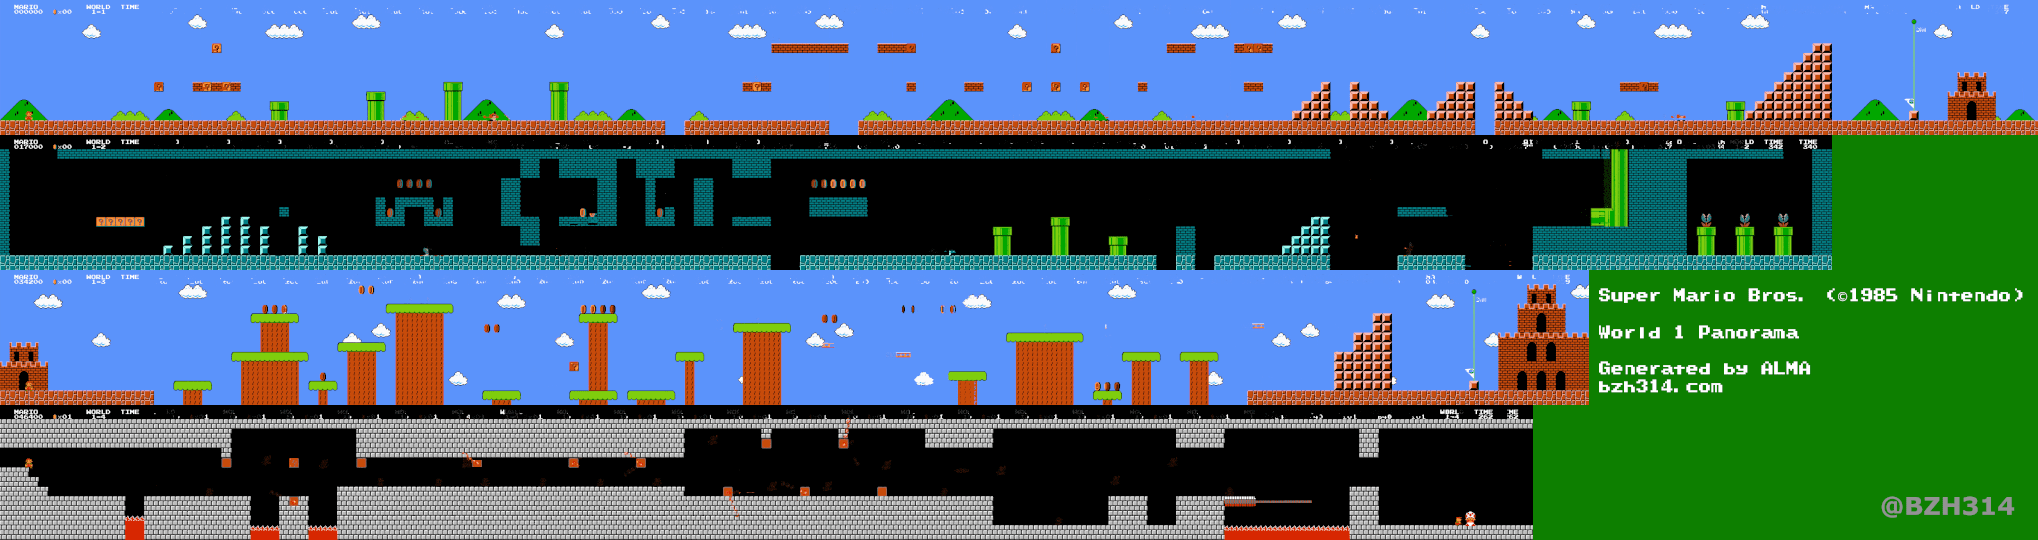 All Super Mario Bros. levels of World 1 stitched in a panorama by ALMA from a video gameplay